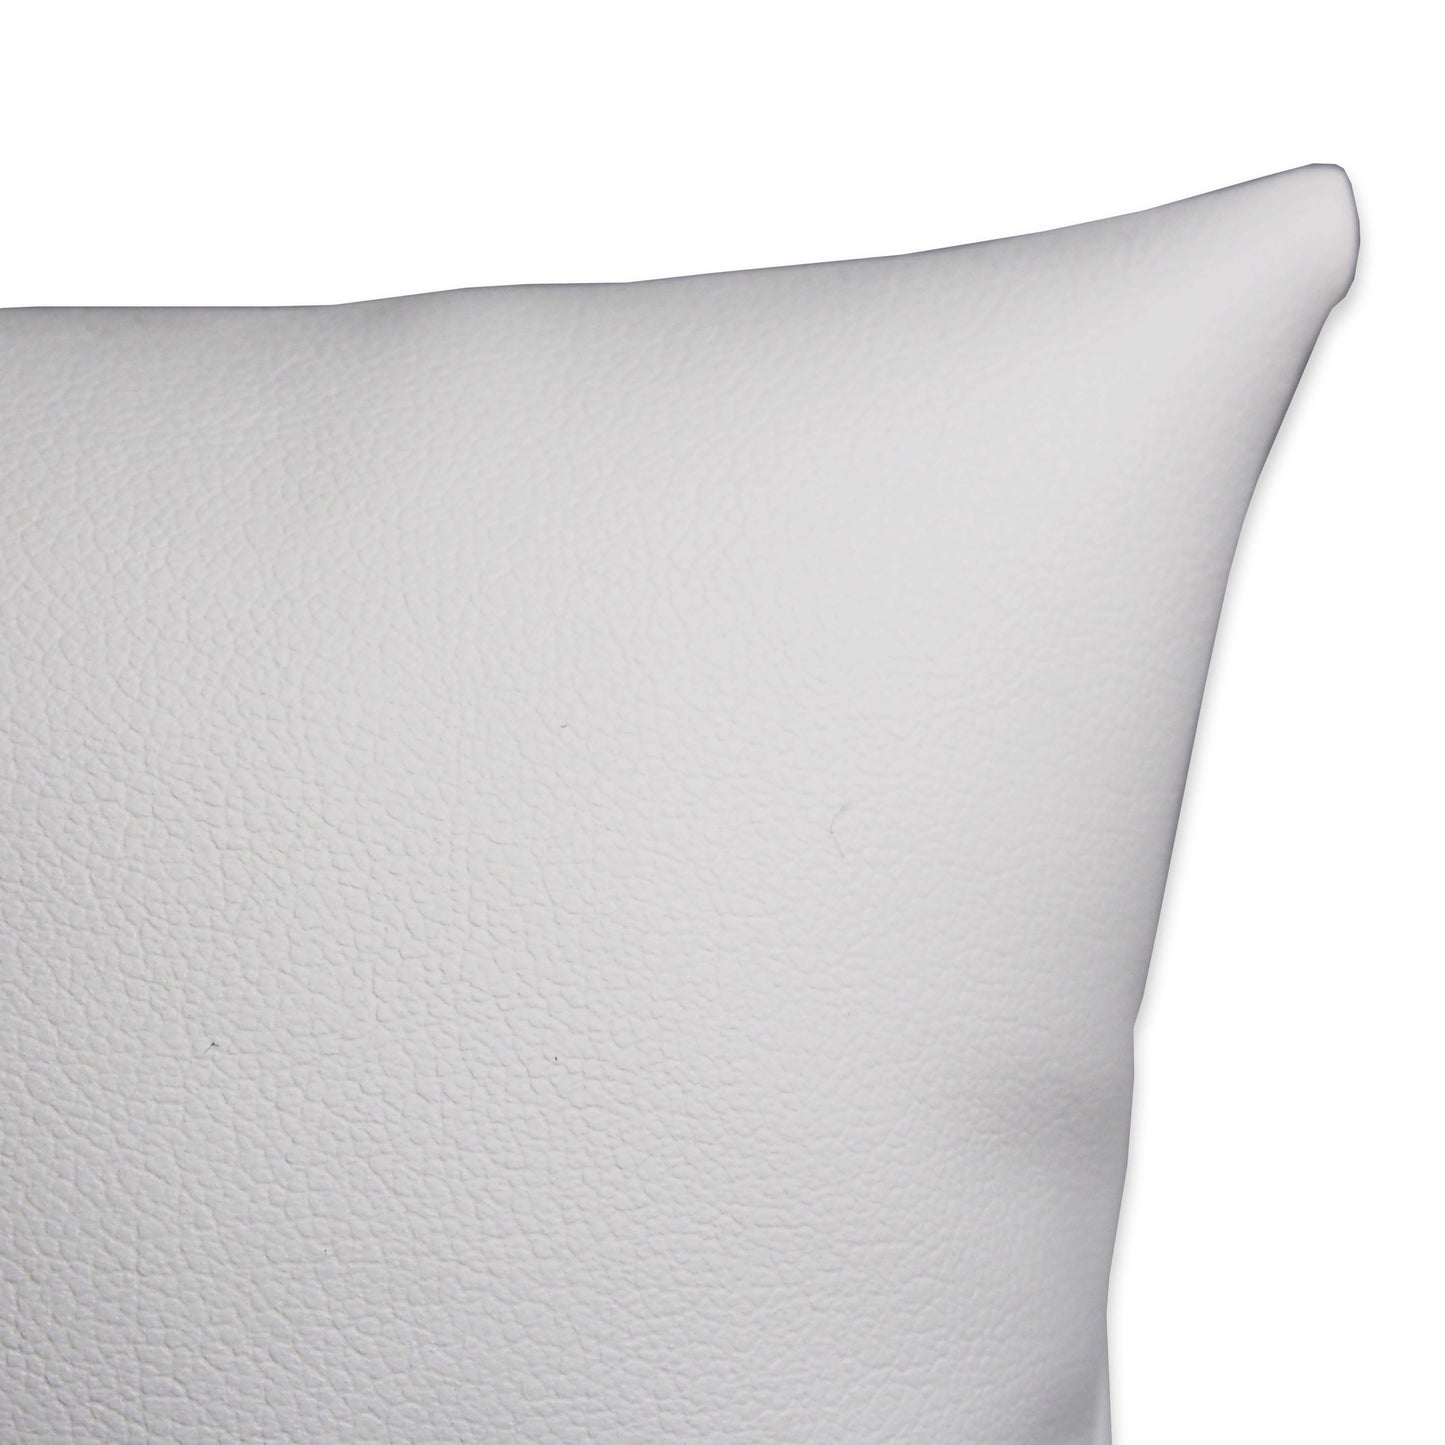 3" White Leatherette Pillow Displays